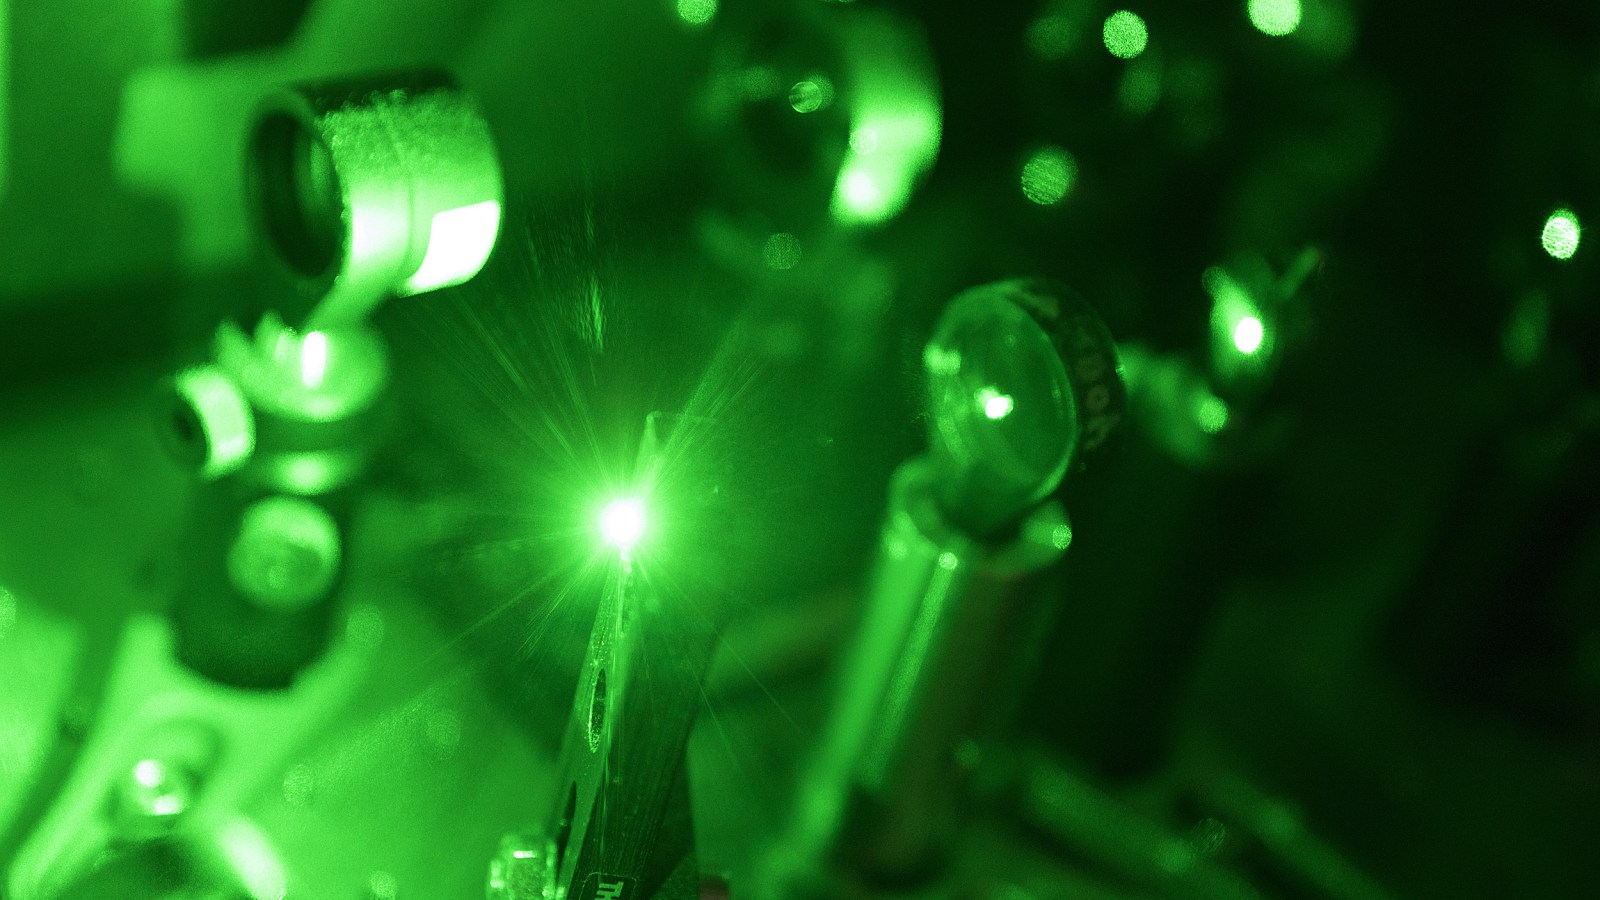 Green lasers and magnets used to detect NMR signals